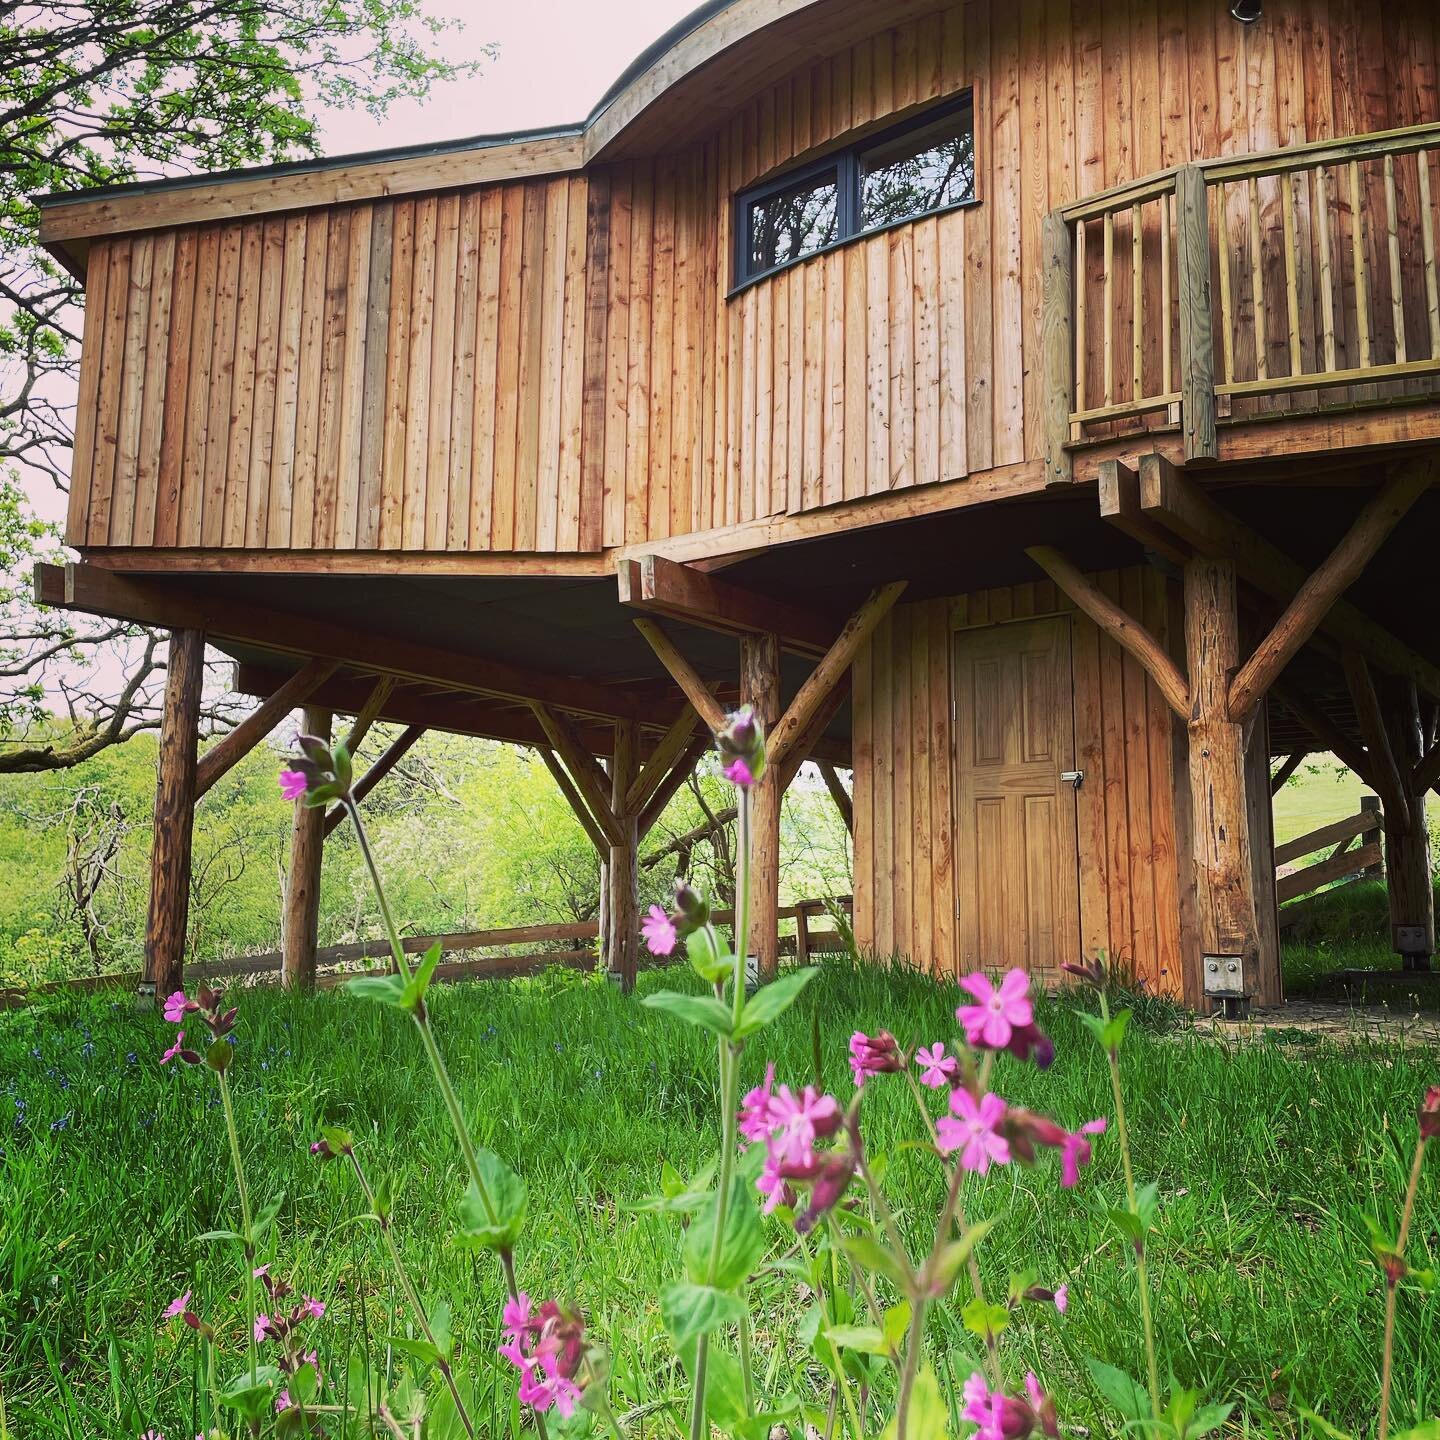 Ty&rsquo;r Derw Treehouse looking fabulous surrounded by nature in a stunning location in Wales 🏴󠁧󠁢󠁷󠁬󠁳󠁿 
.
.
.
.
.
.
#surroundedbywildlife #surroundedbynature #treehouseholiday #wales #hottub #familyholiday #cambrianmountains #stream #birthday